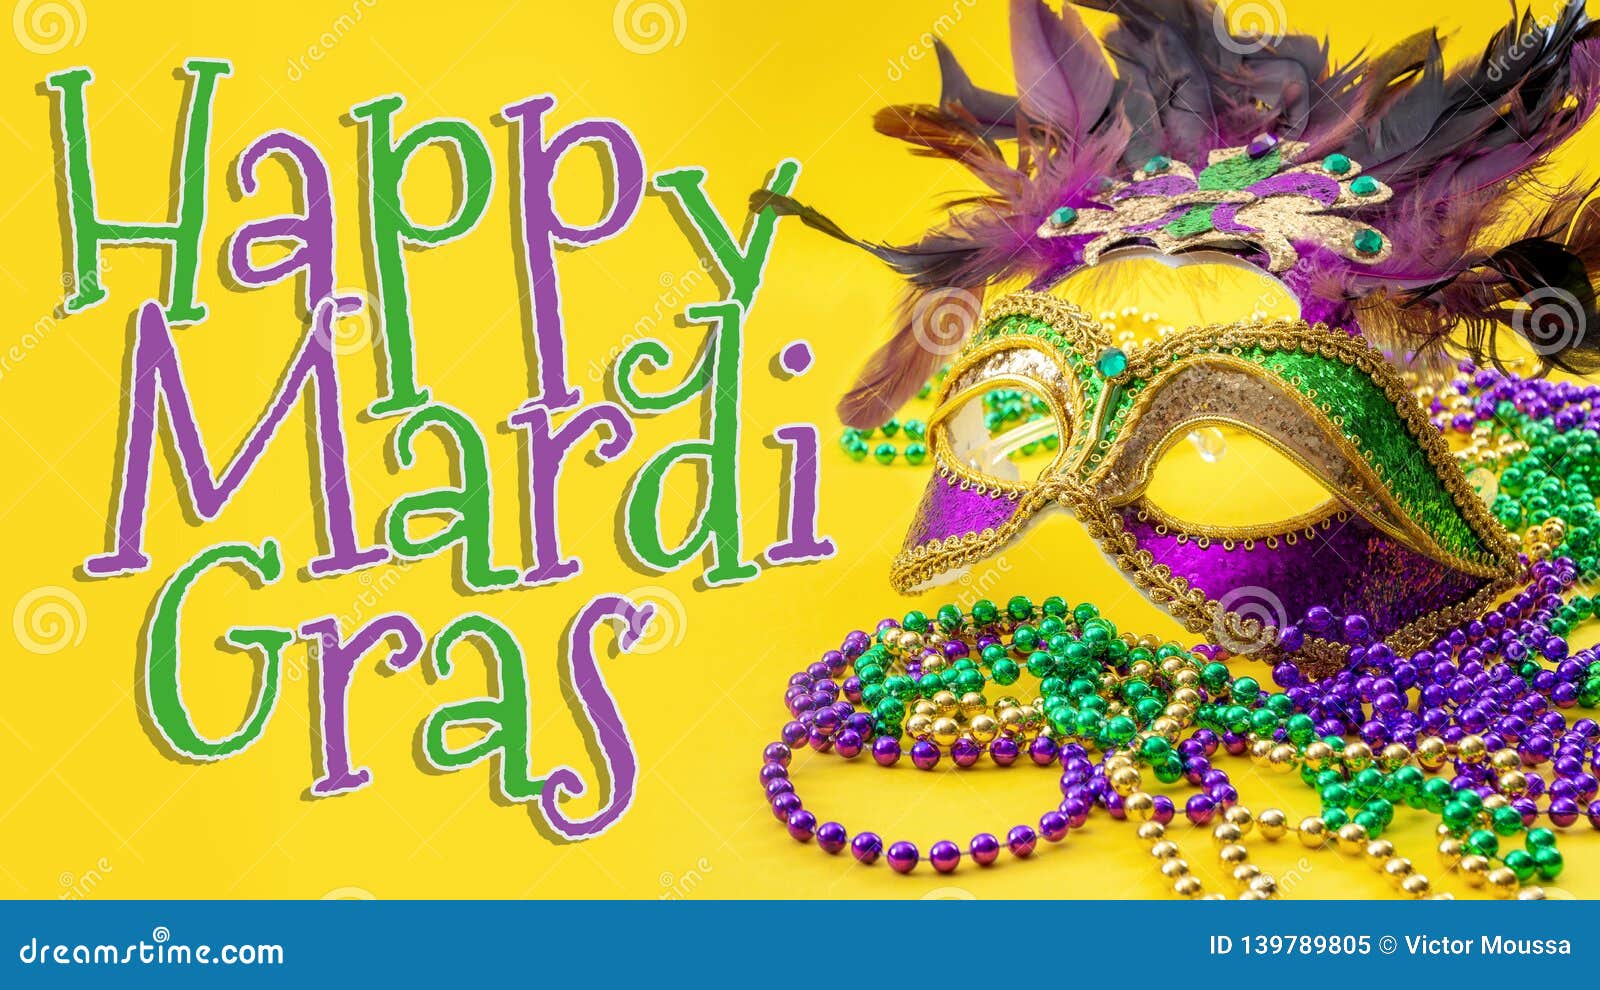 When is Mardi Gras? Here's when it falls in 2023 and how long it lasts.